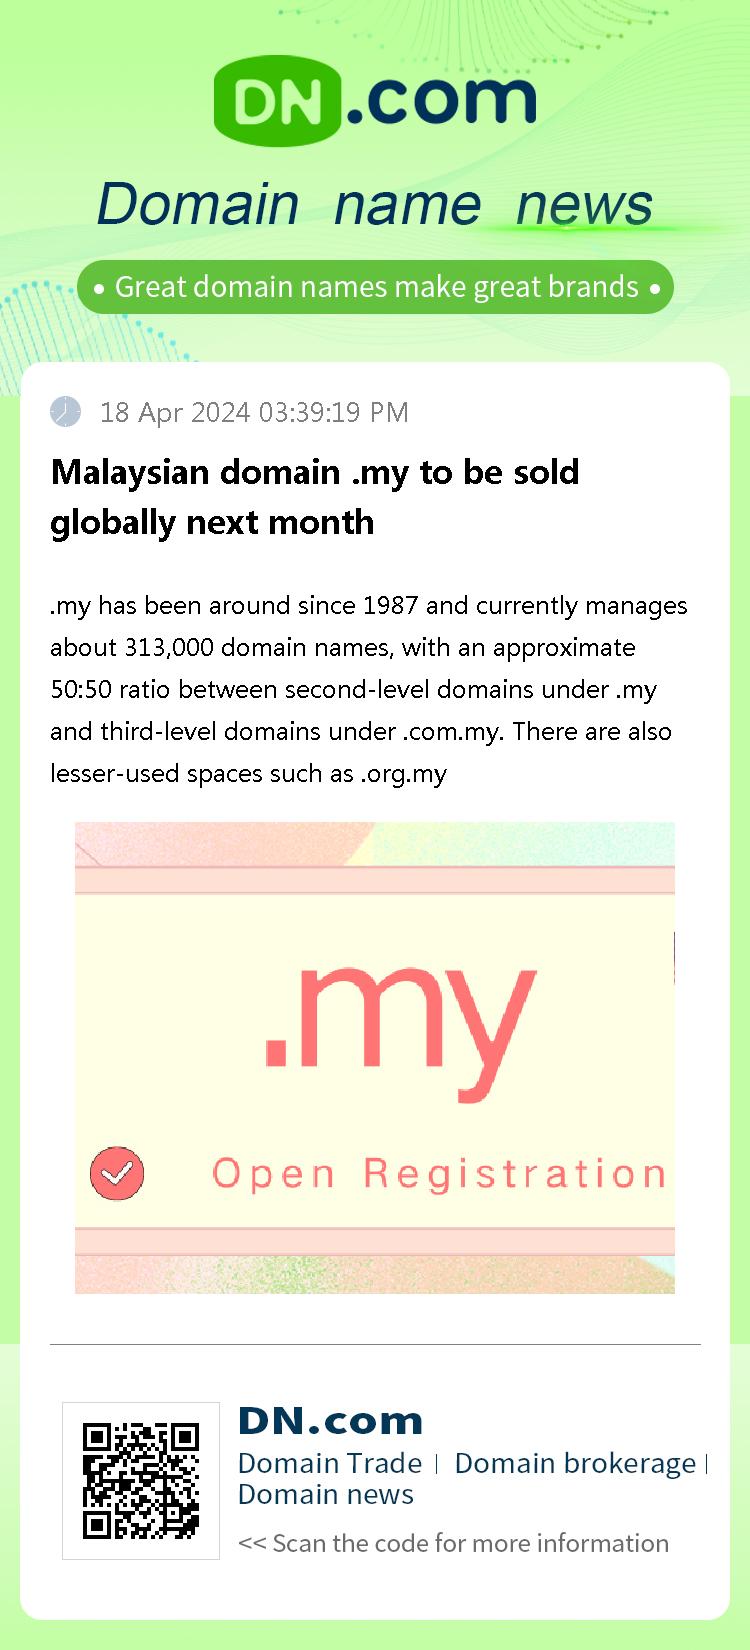 Malaysian domain .my to be sold globally next month